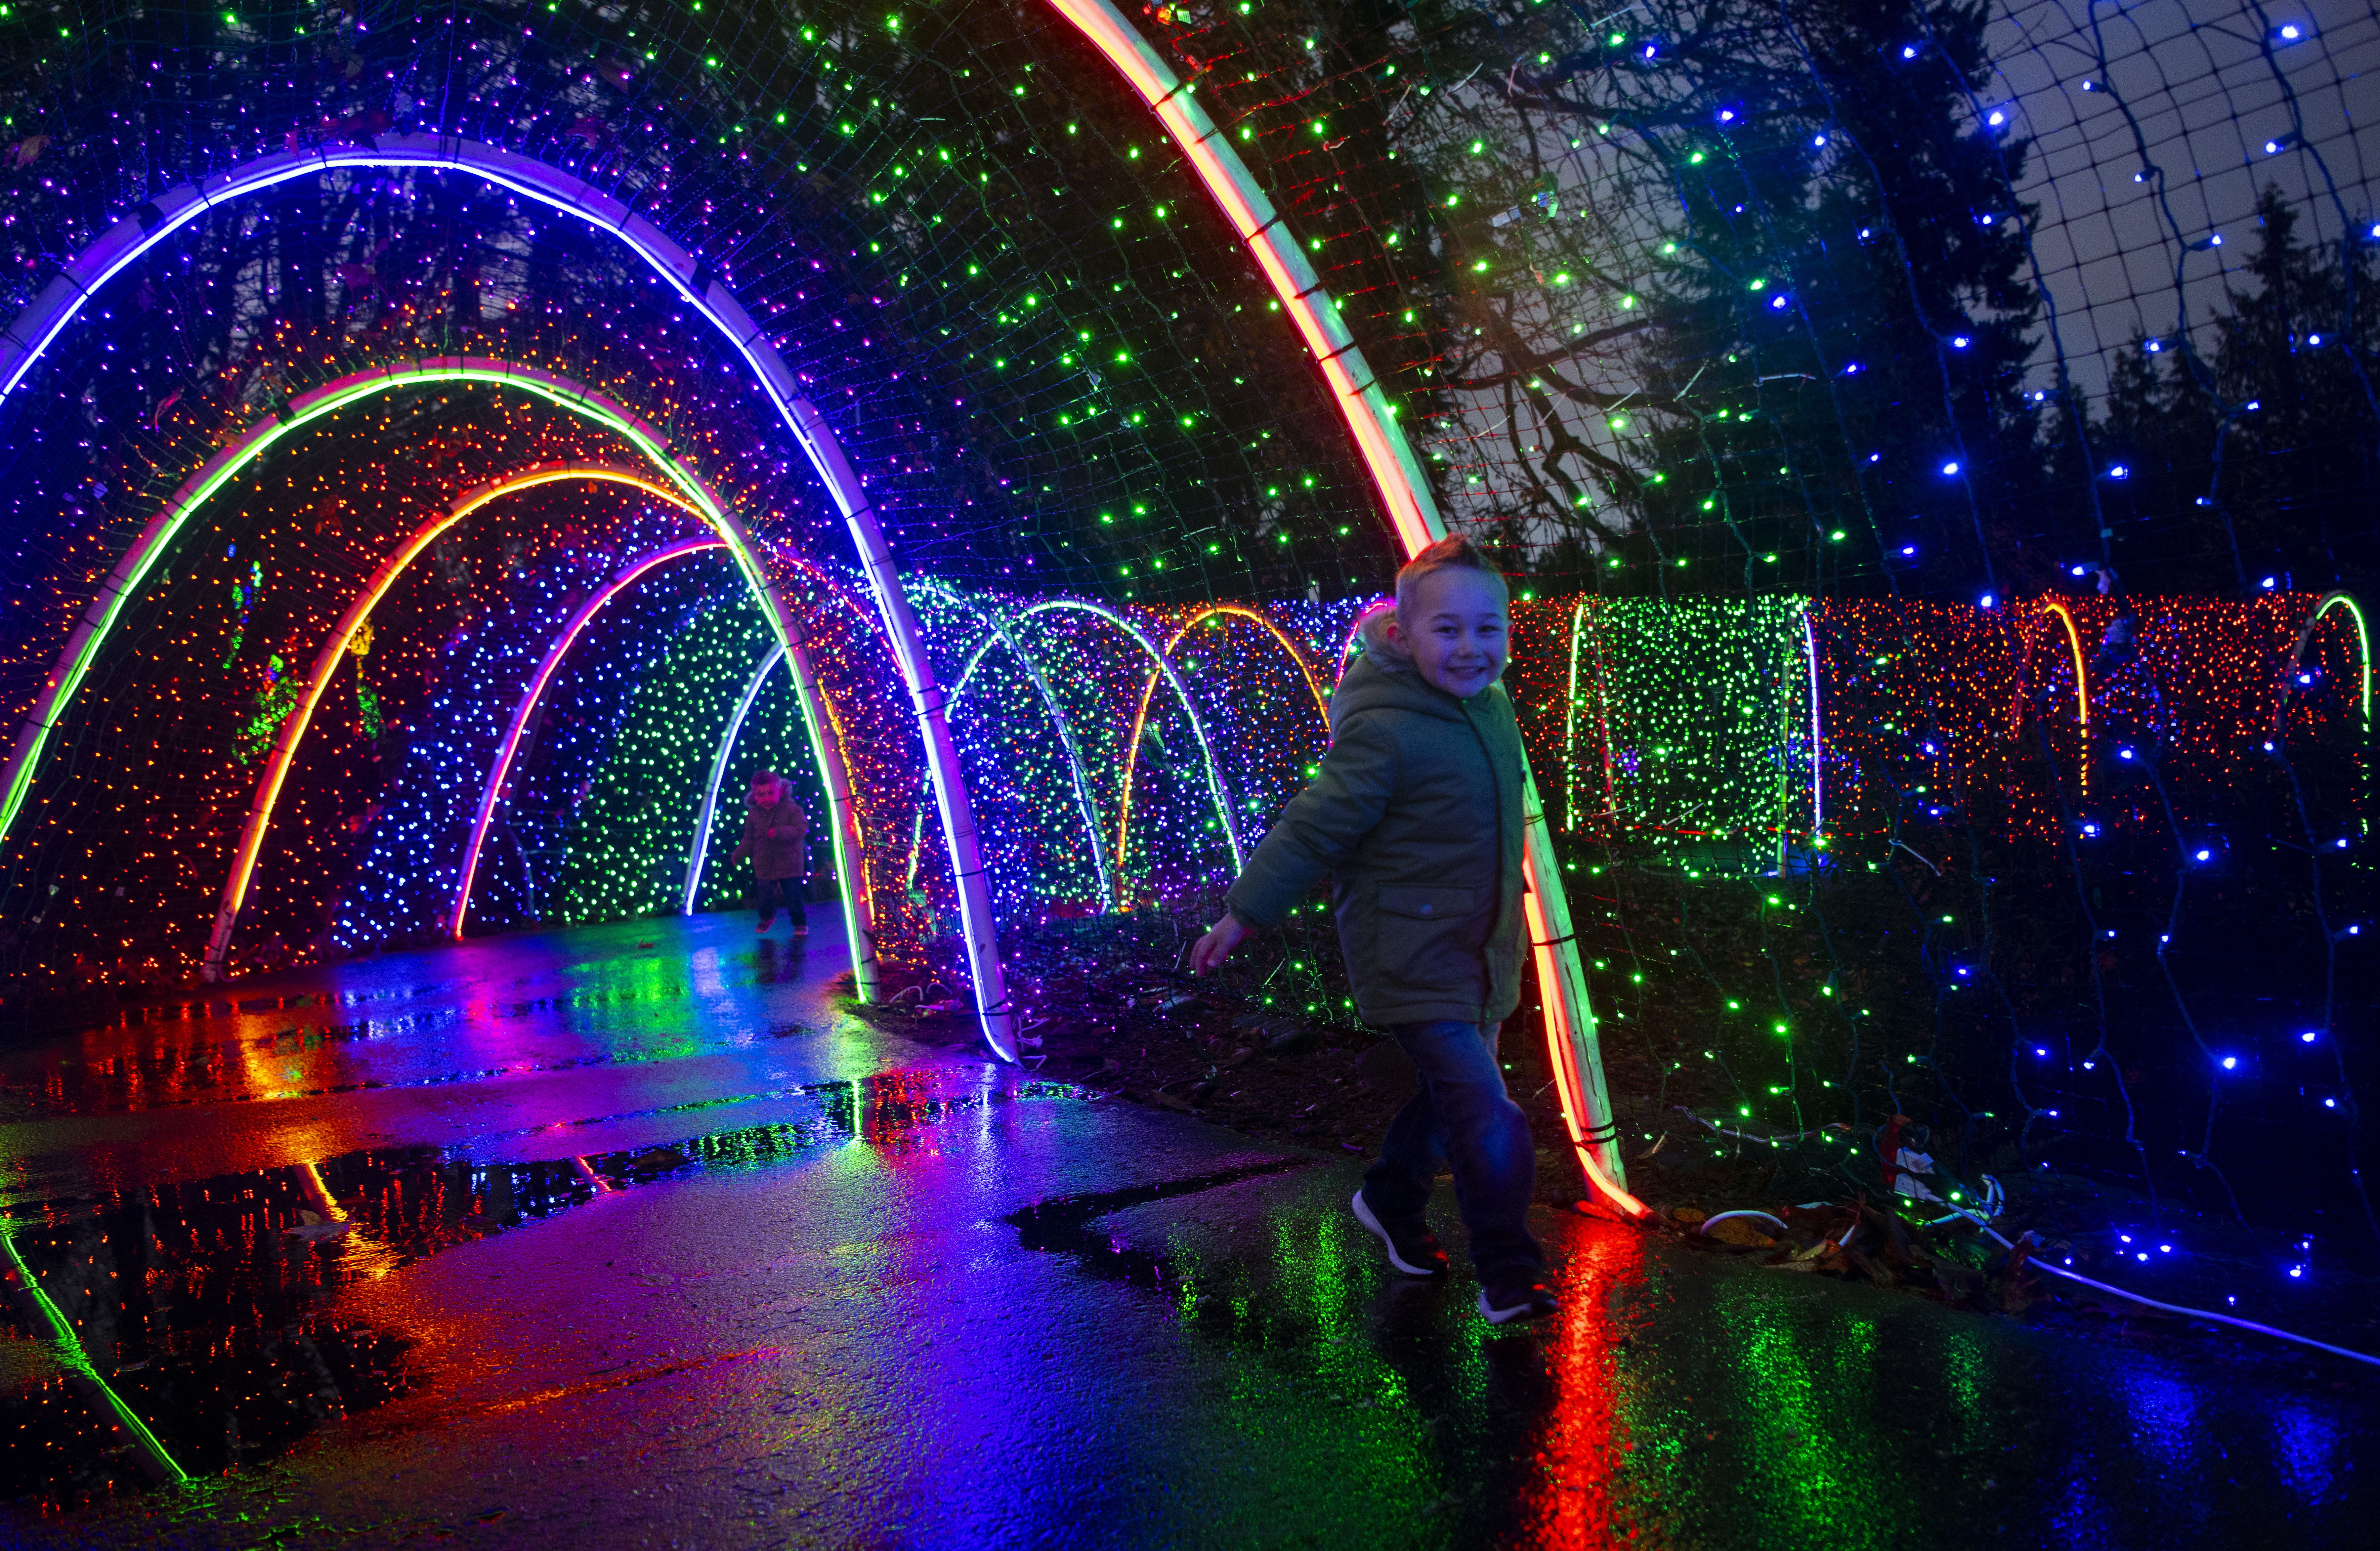 Arches of lights with a child running through.